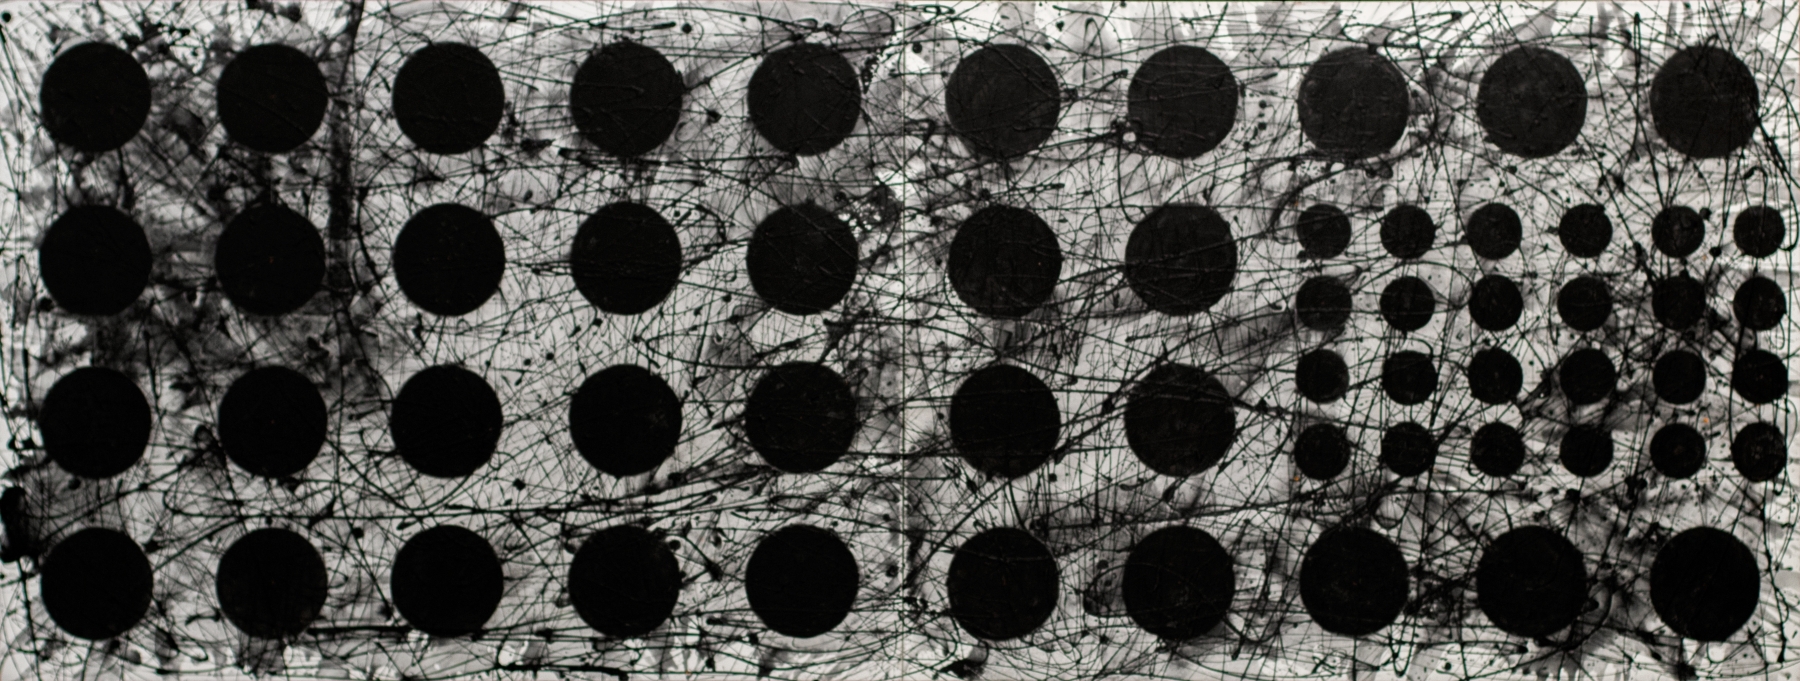 J. Steven Manolis,  BLACK & WHITE (Graphic) 2020; 60”X 144”, Acrylic and latex on canvas, for sale